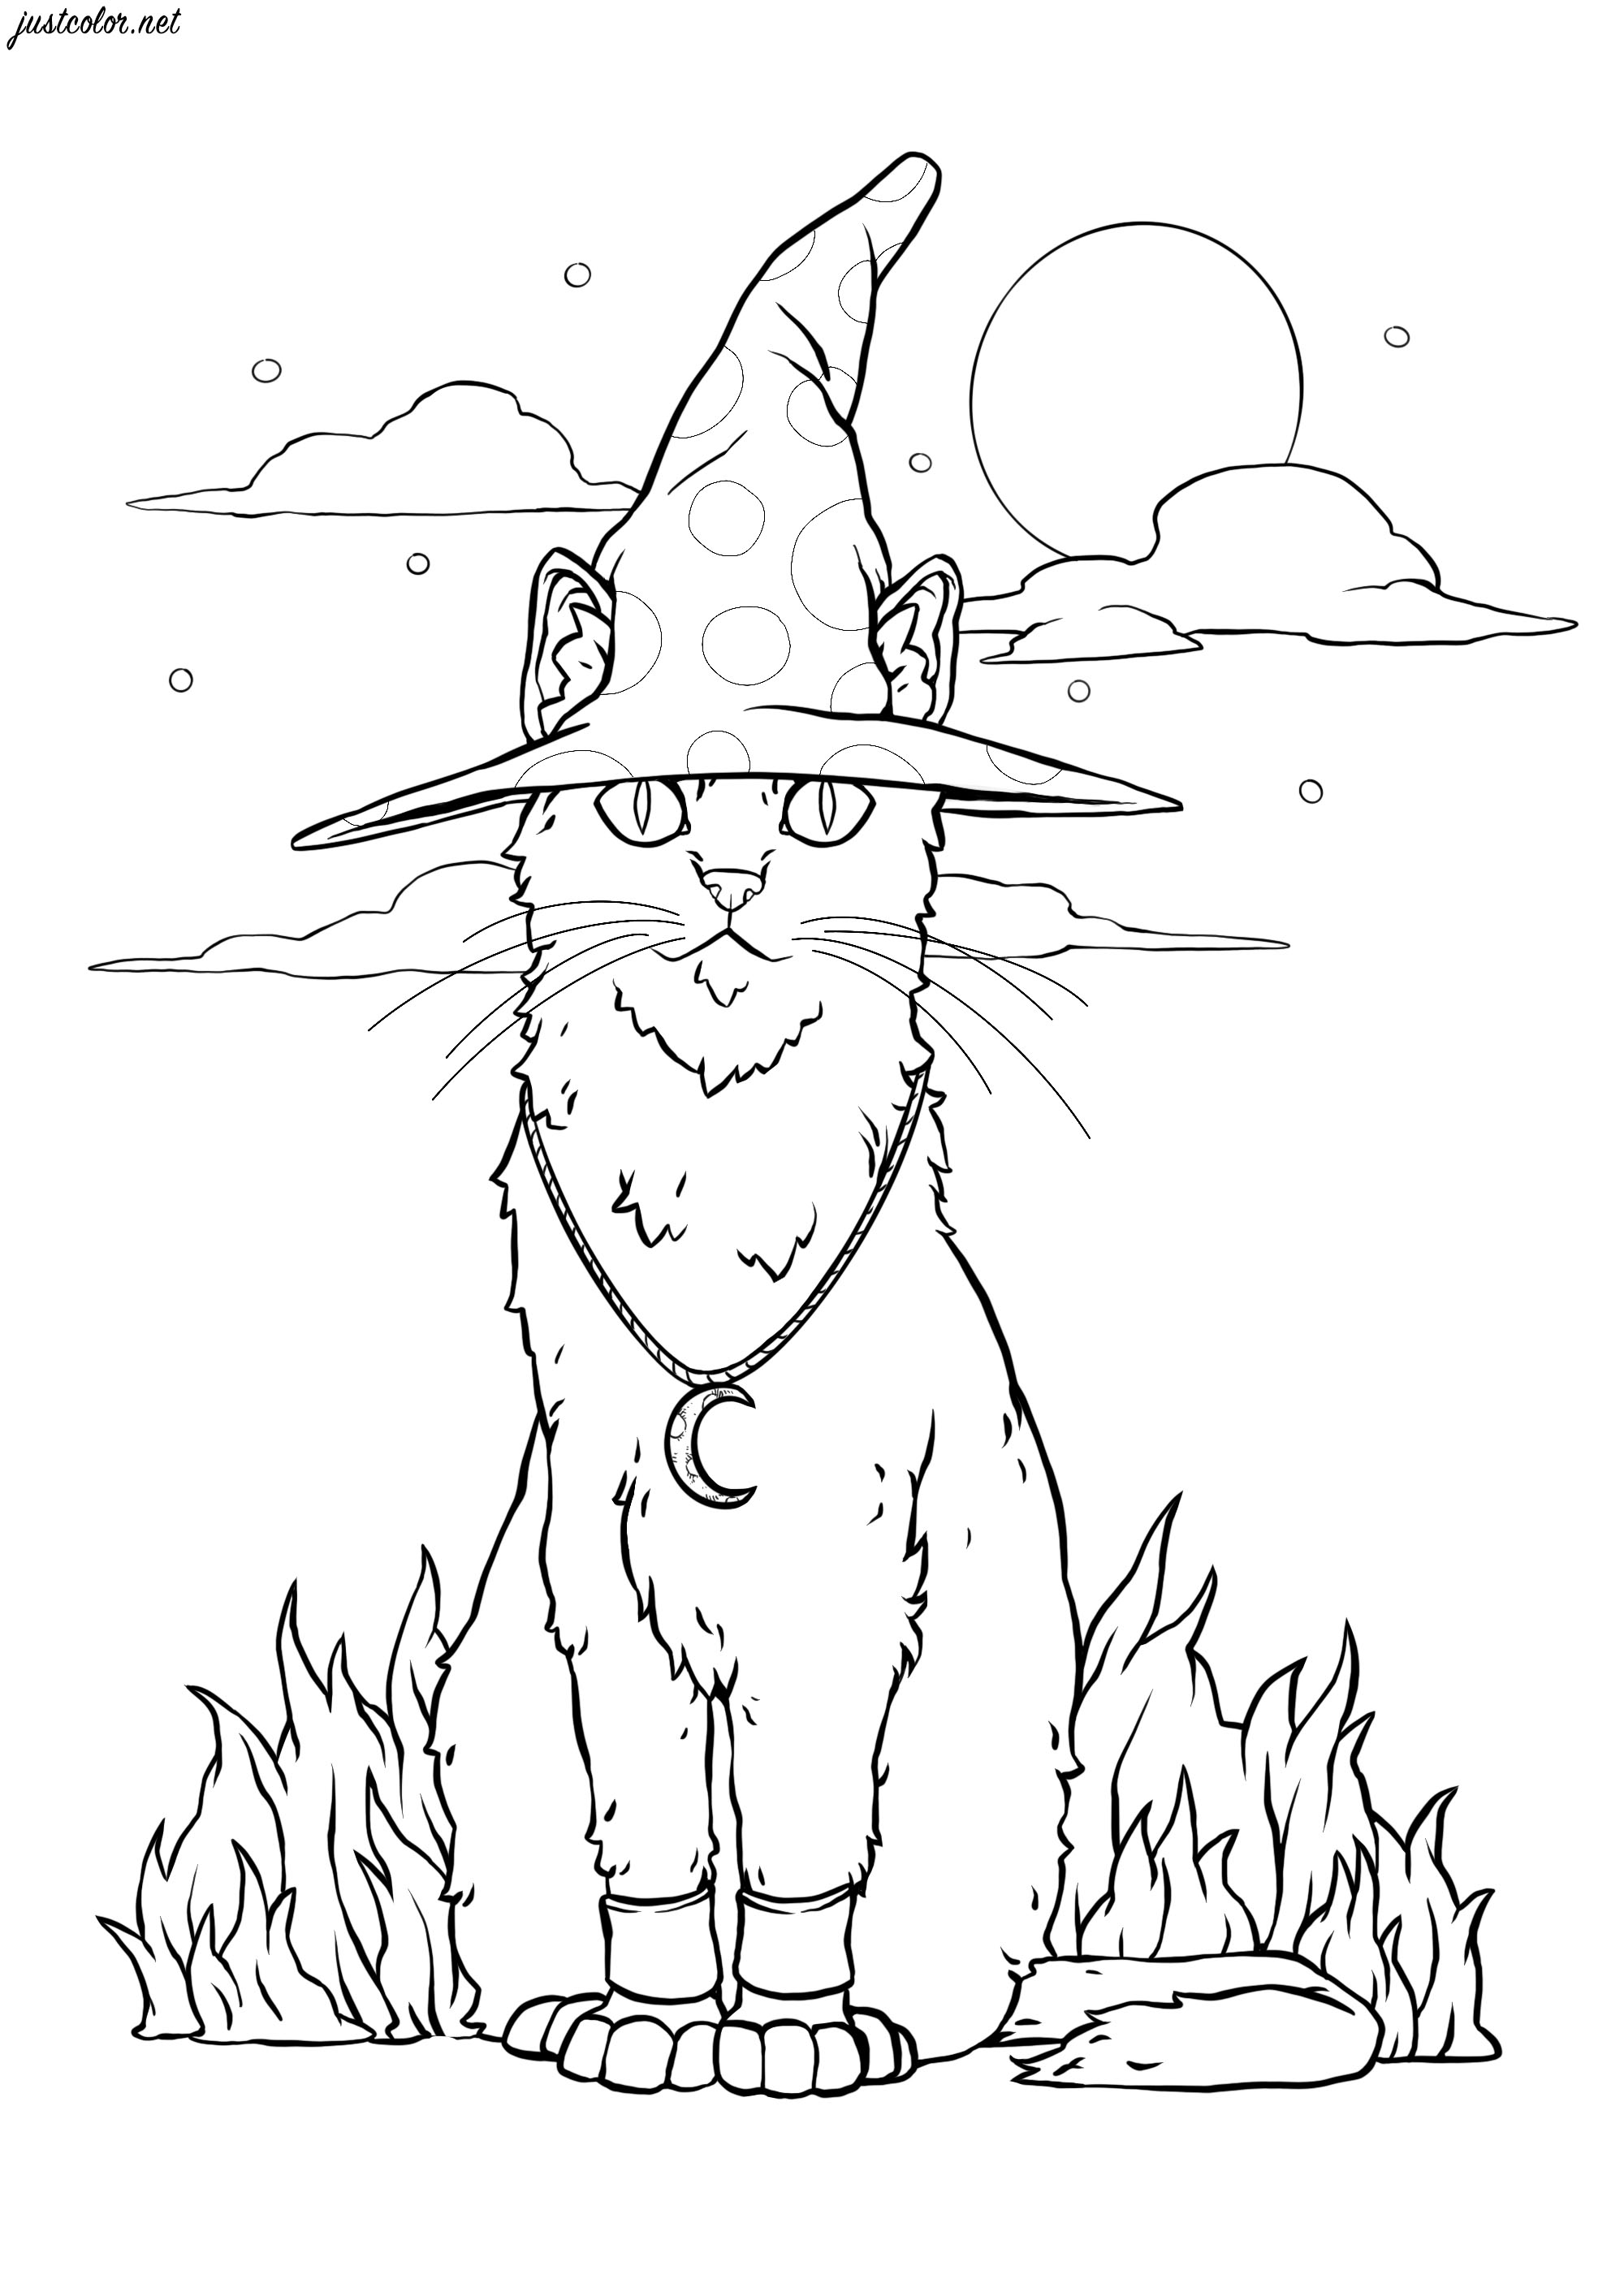 The magical cat - Halloween Adult Coloring Pages